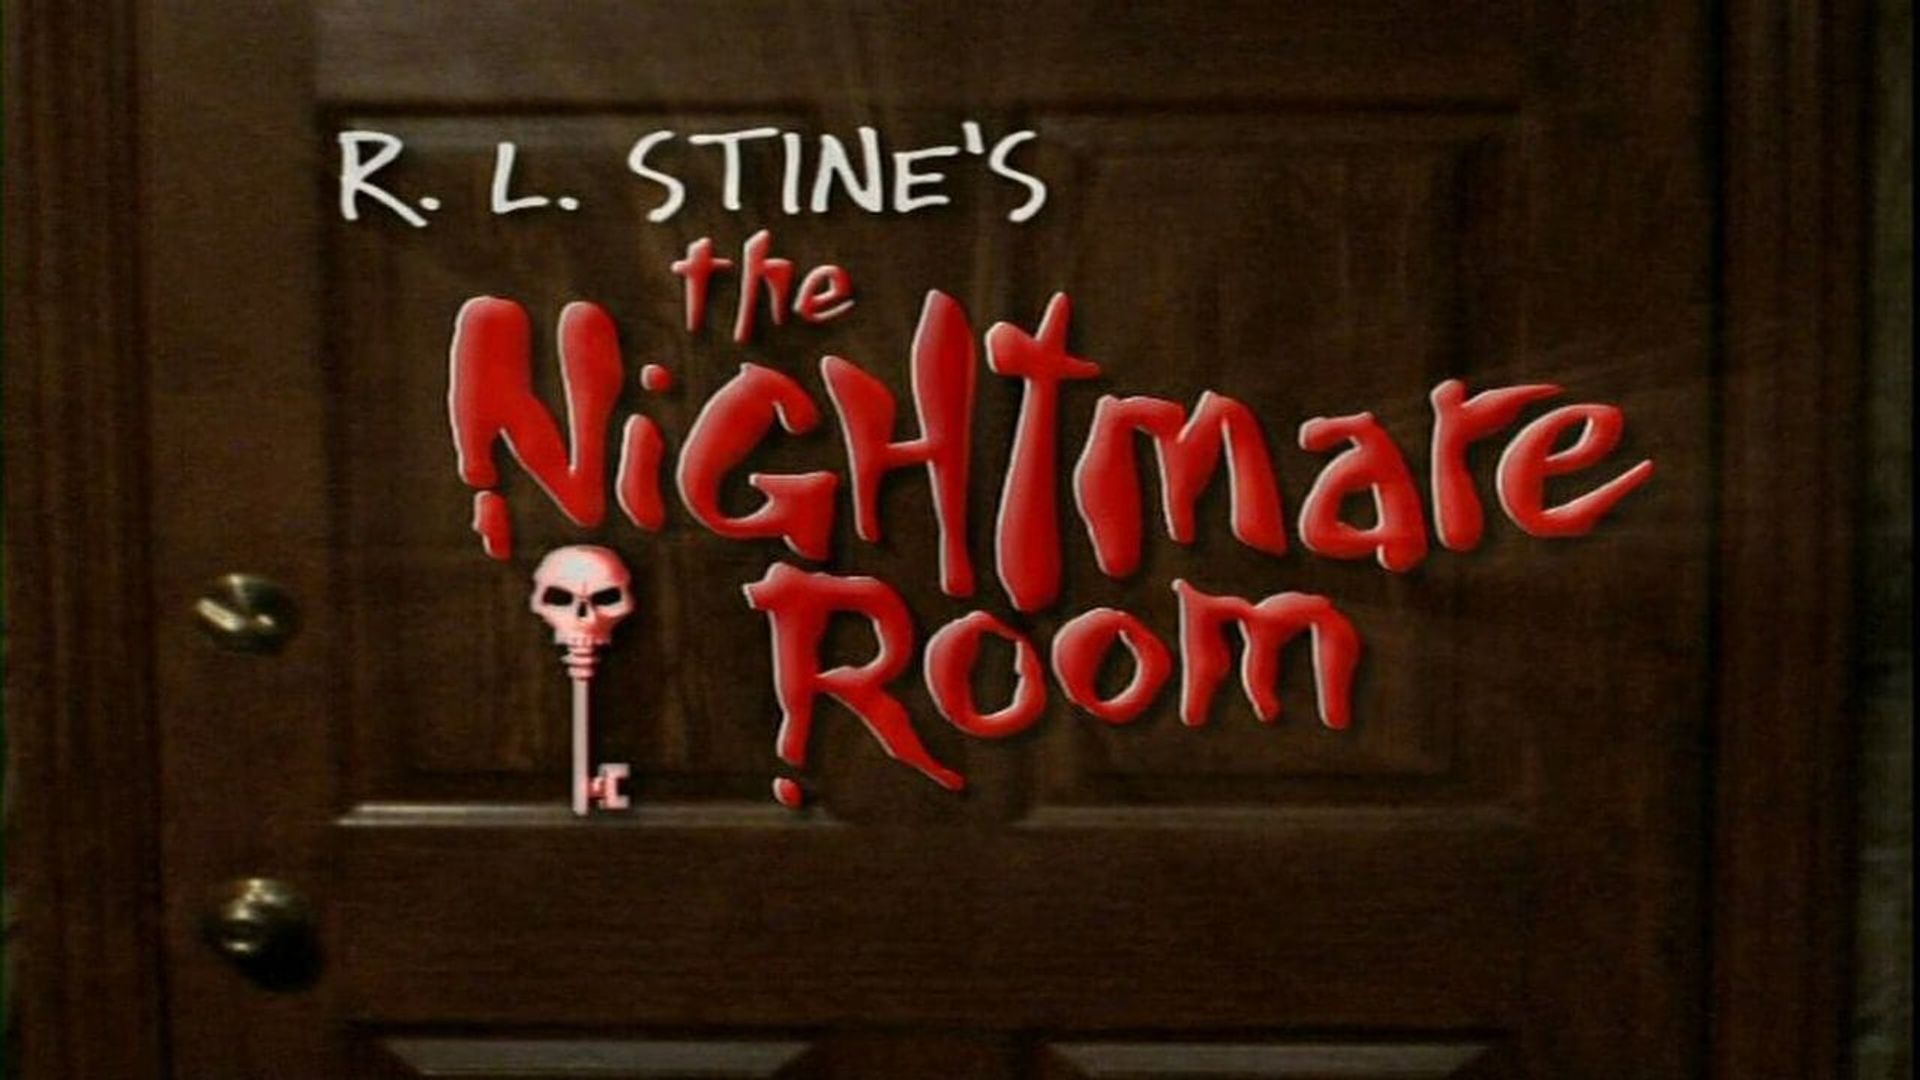 The Nightmare Room background